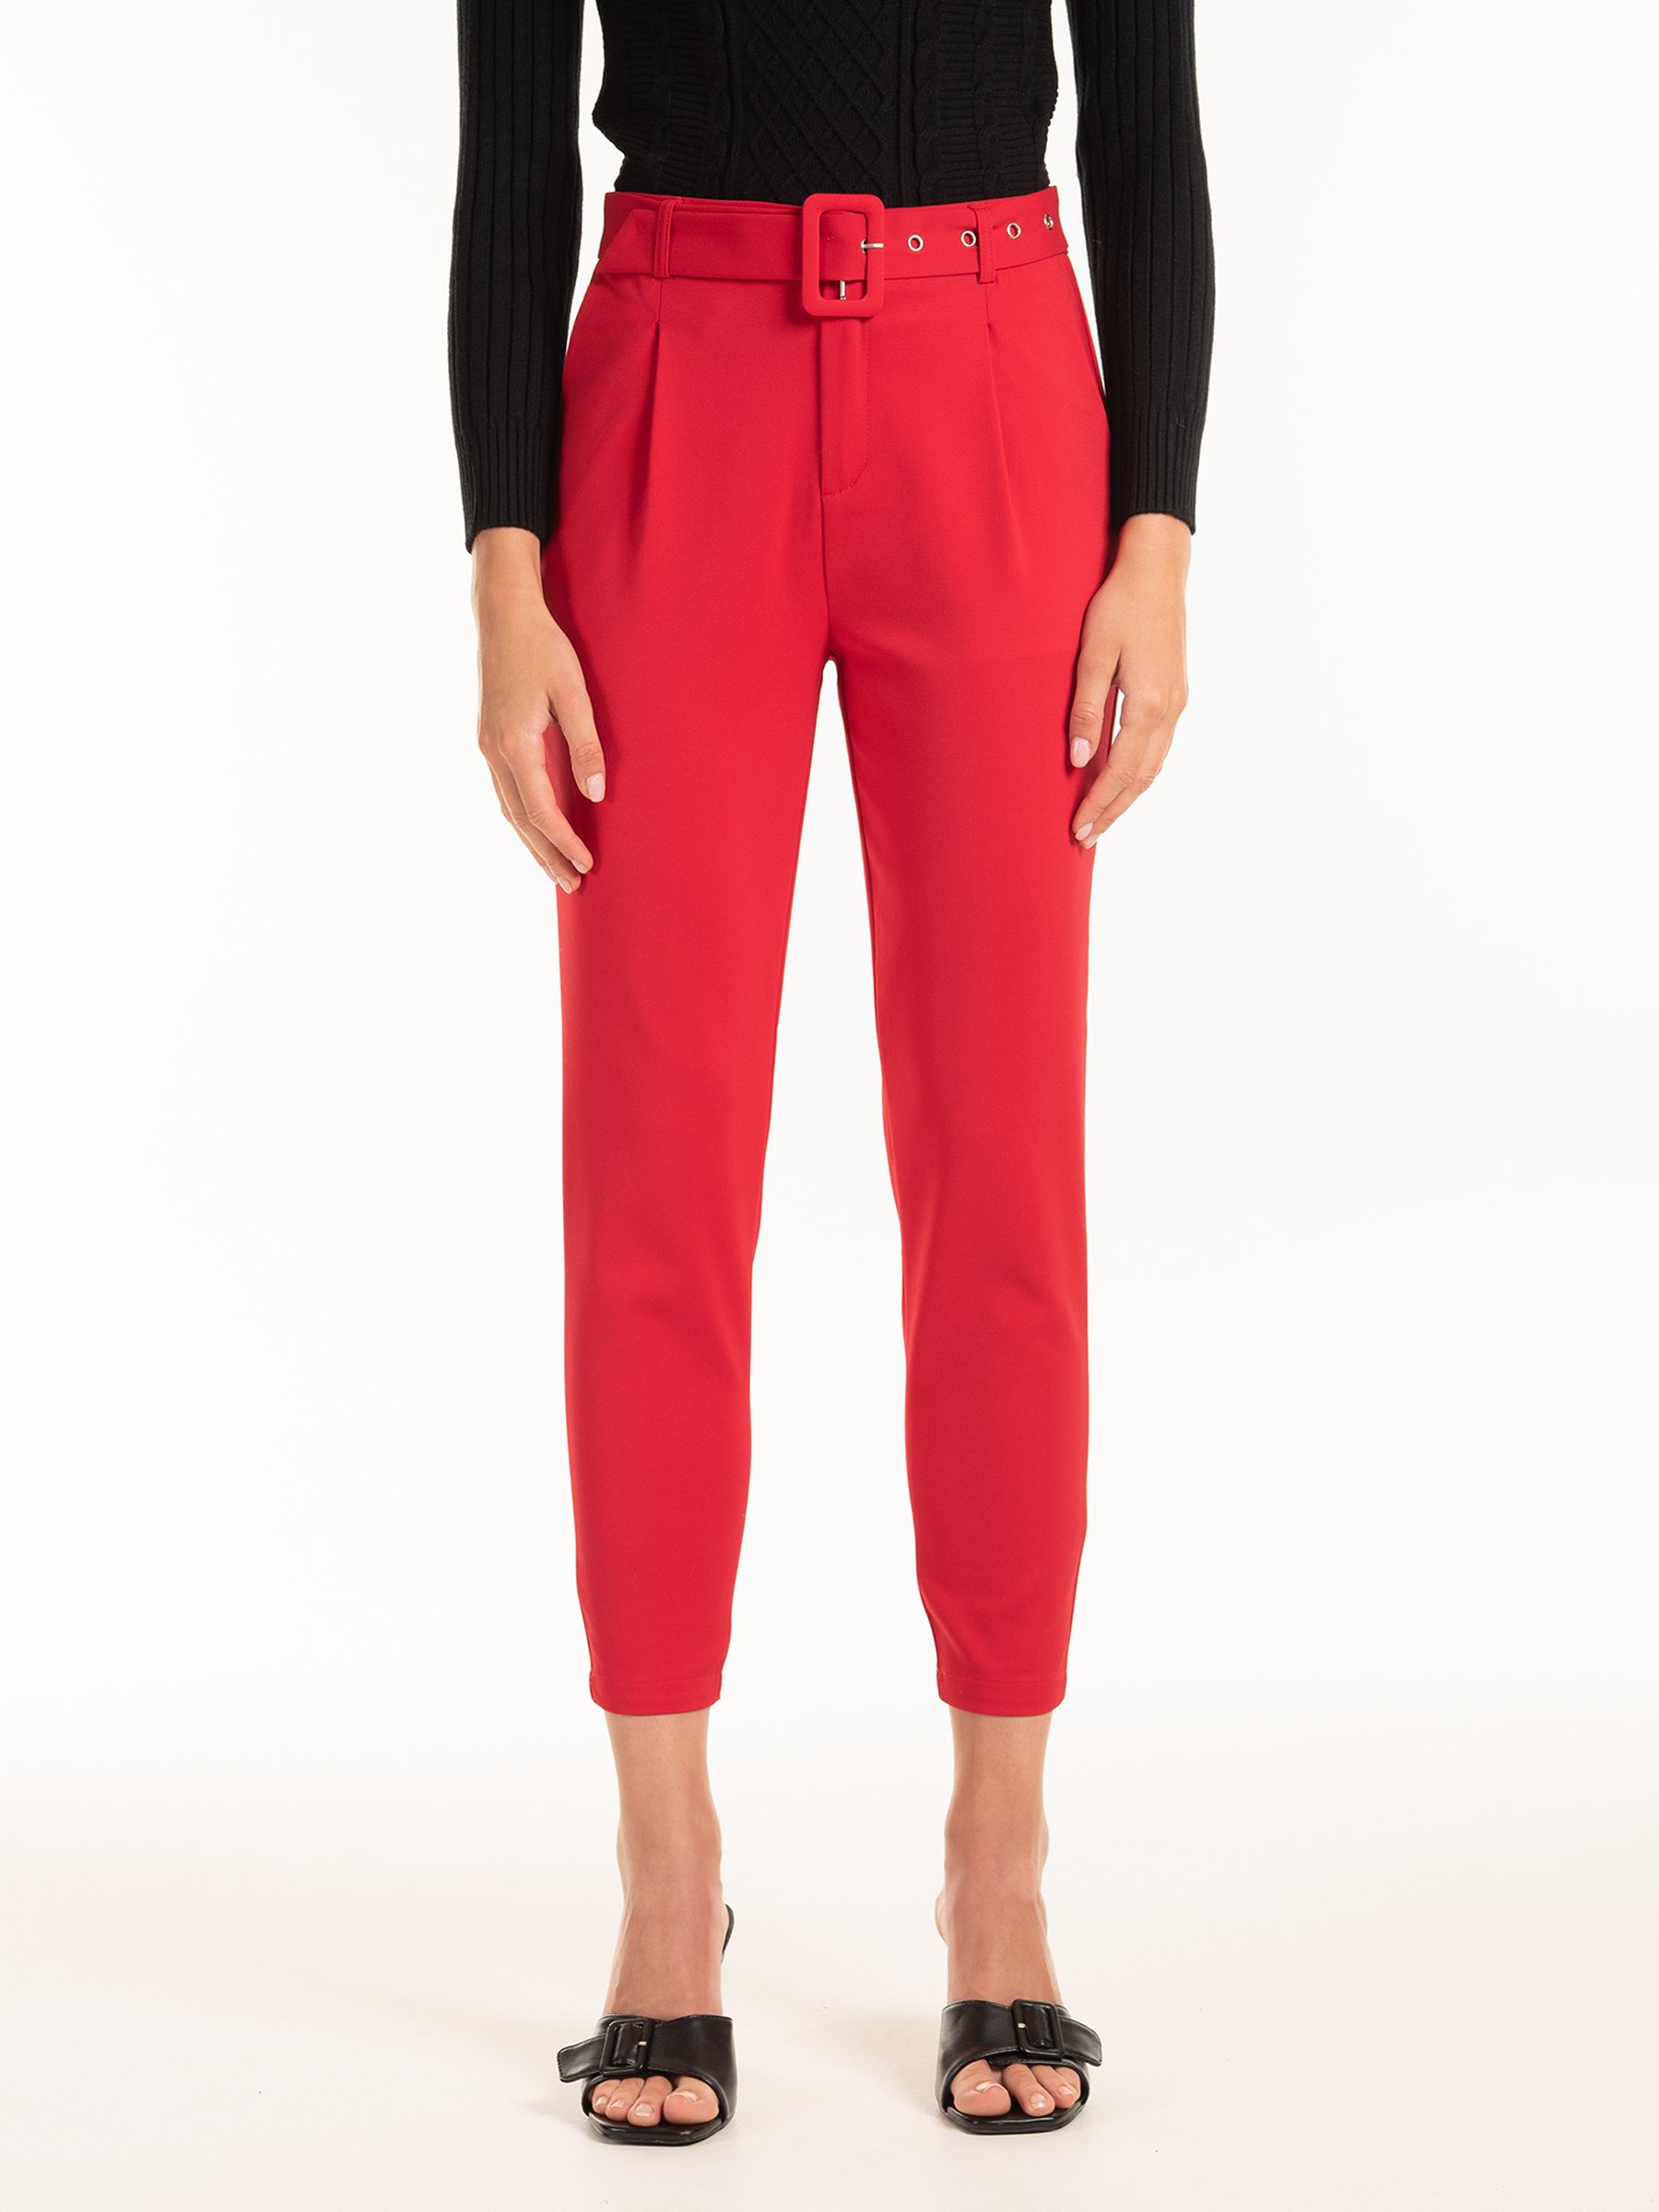 ZARA CARROT FIT TROUSERS WITH DARTS DETAIL Stone SIZE S | 1478/060 | Fitted  trousers, Trousers, Zara